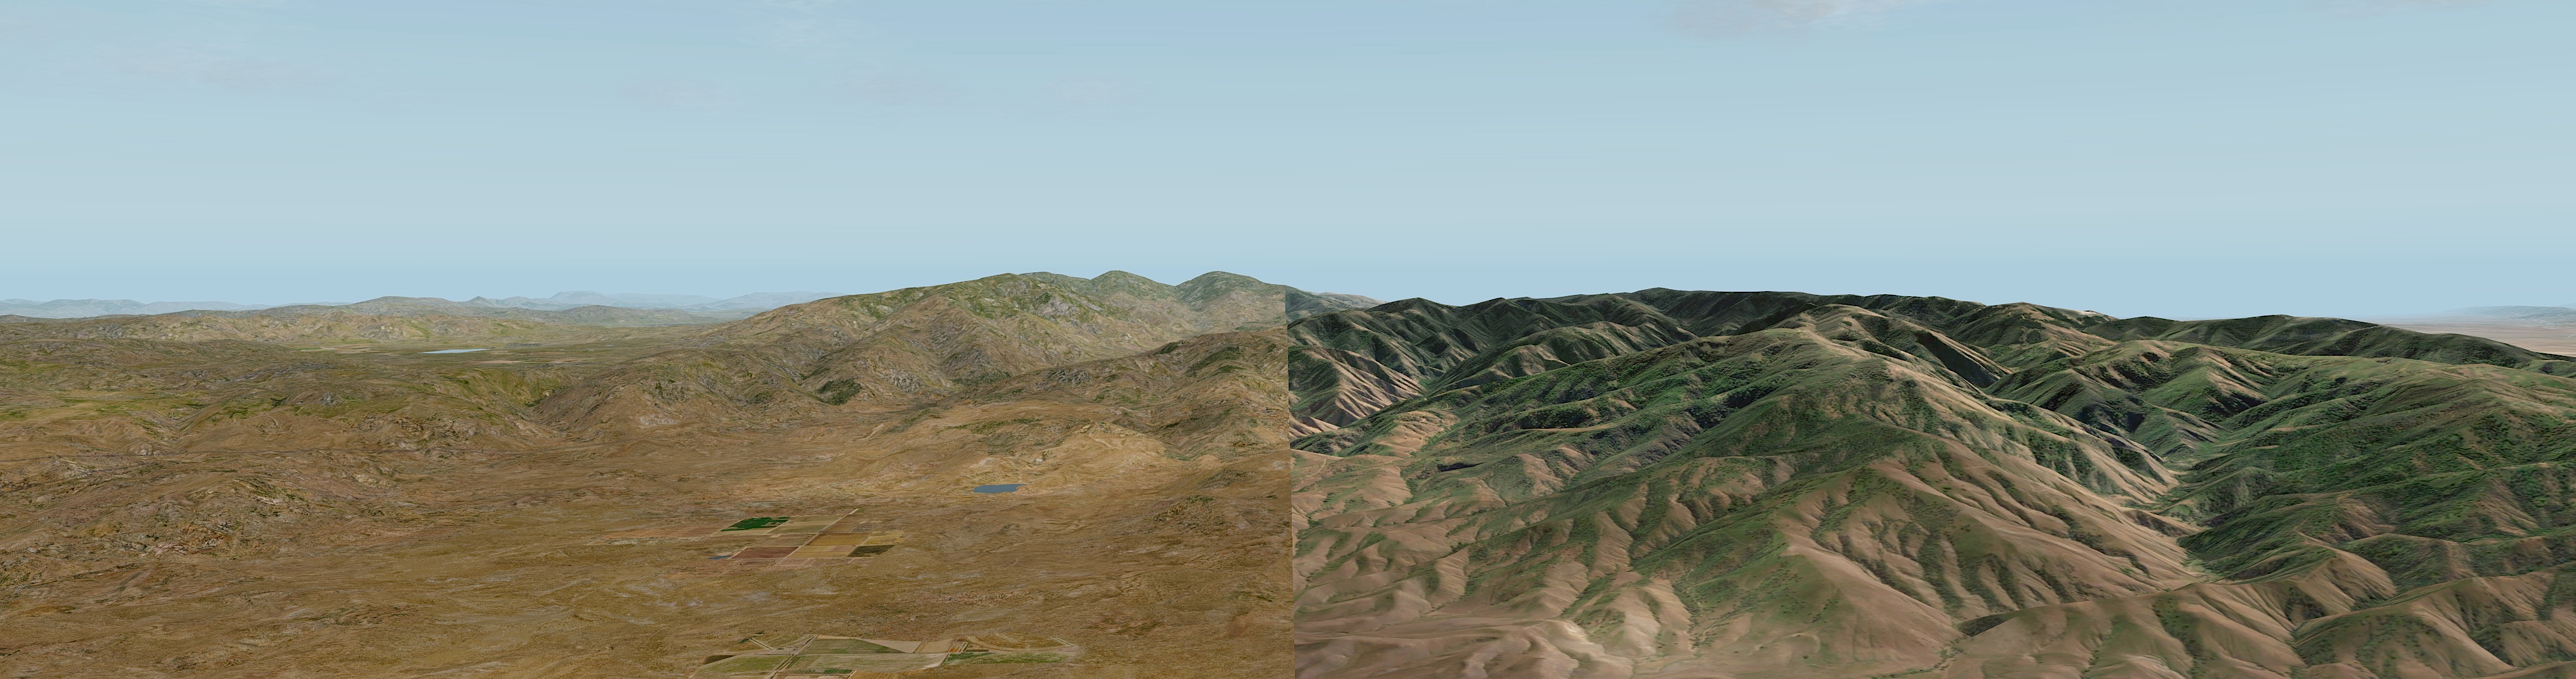 Left side of image is X plane's standard texture, right side is g2xpl at zoom level 15.